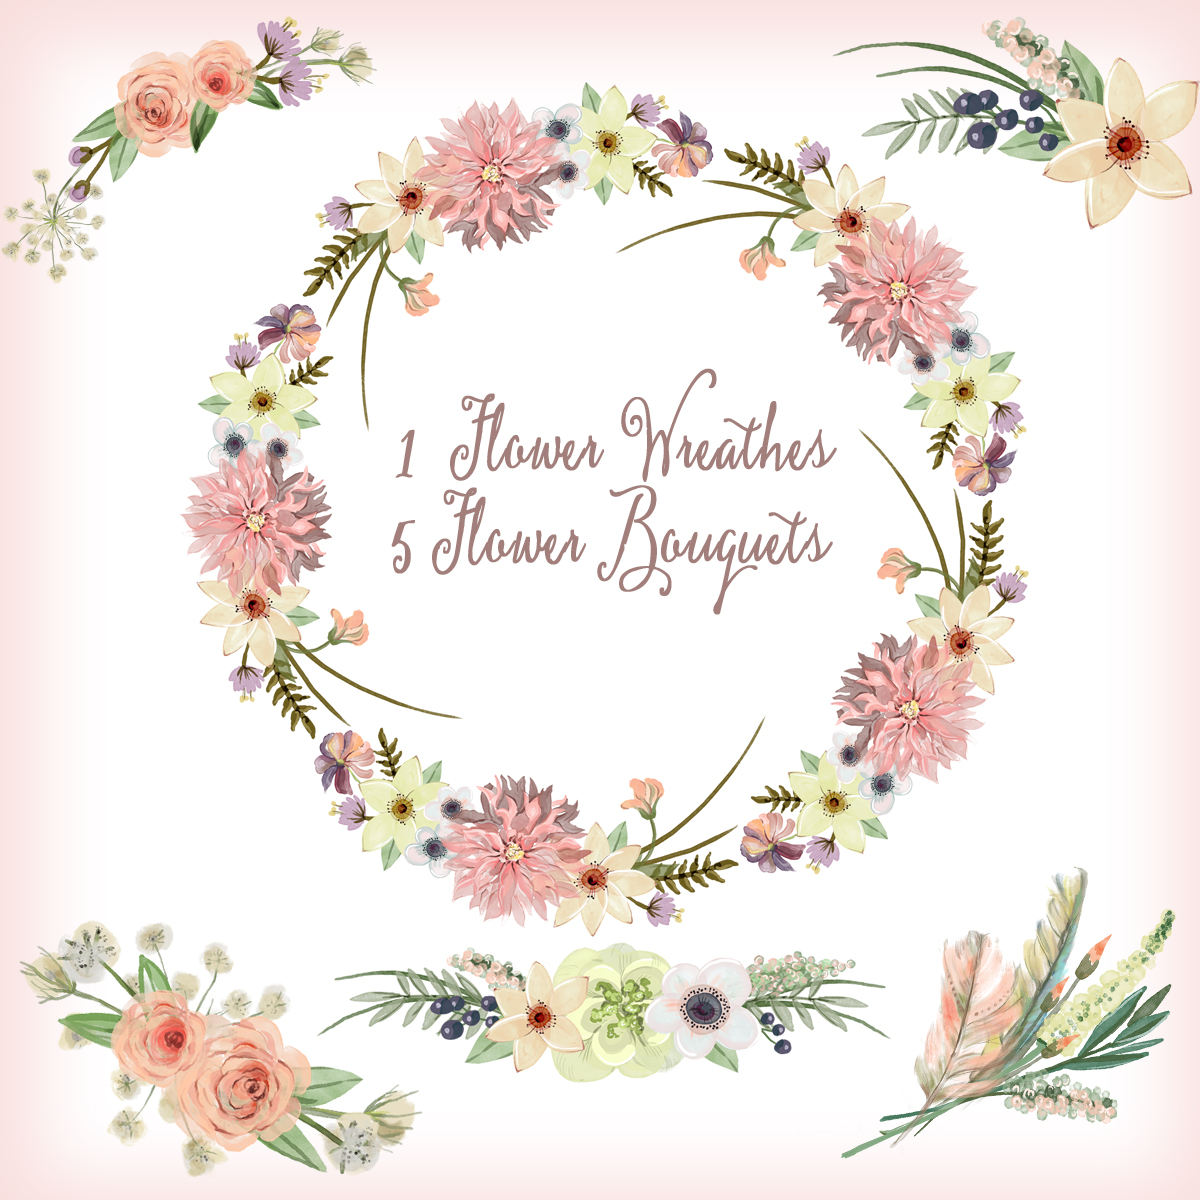 Watercolor hand painted floral frames clipart: "FLORAL WREATHS" pink flowers clipart wedding clipart DIY invite greeting card floral clipart hand painted